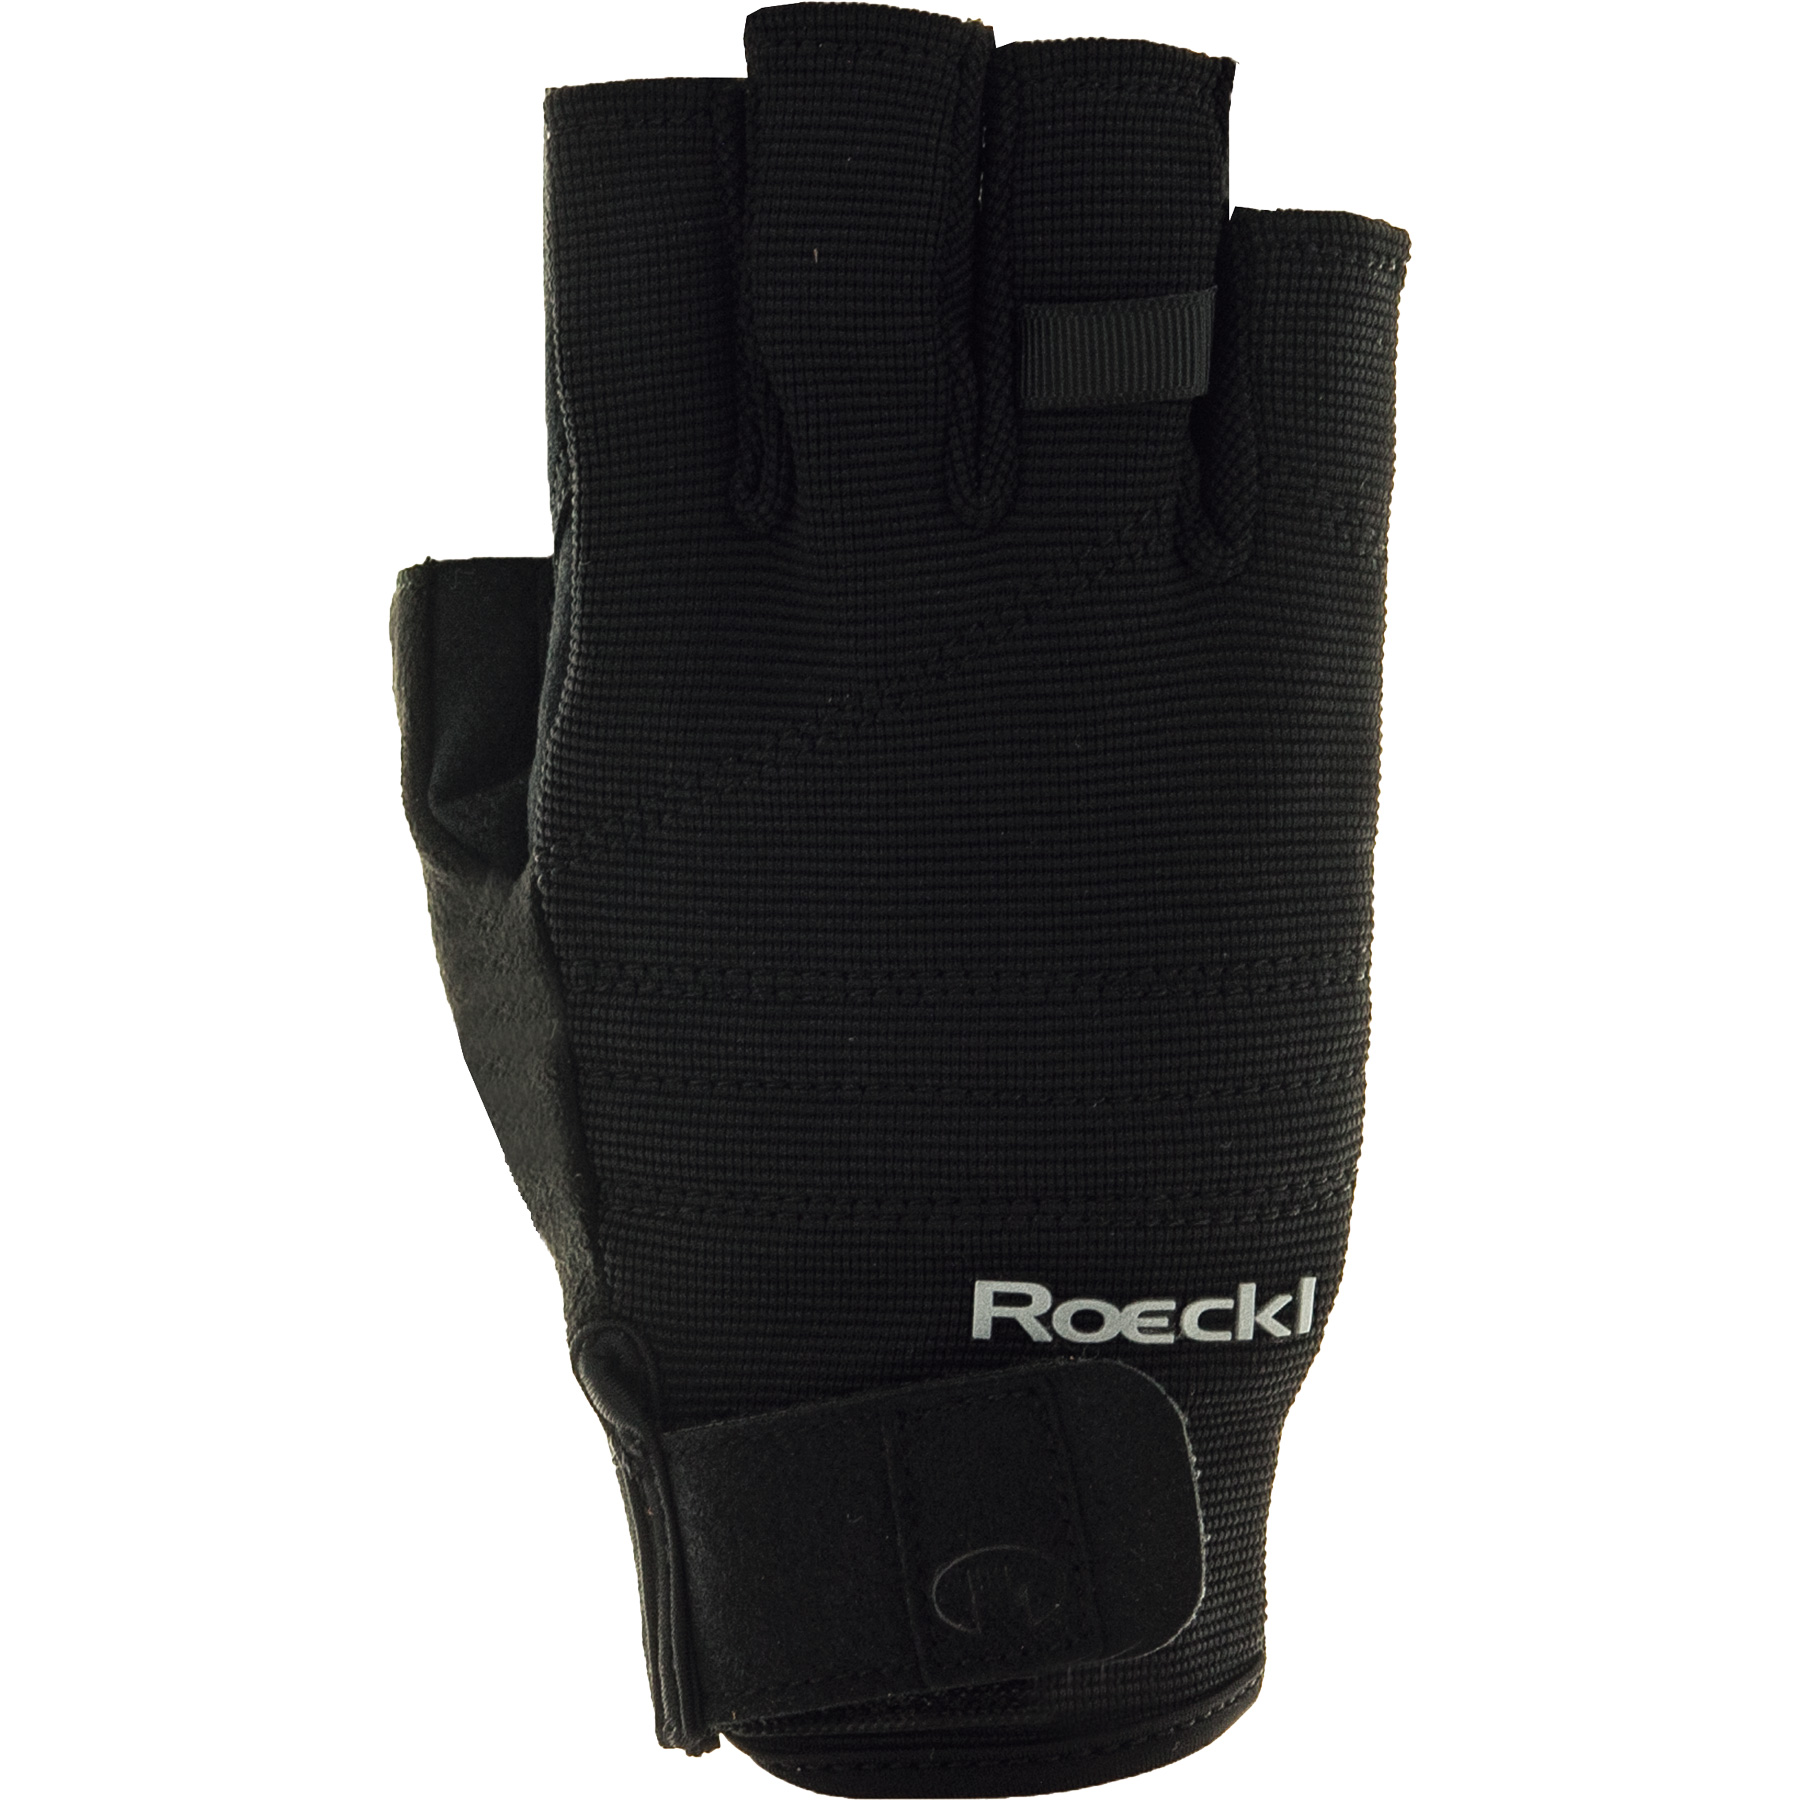 Picture of Roeckl Sports Kozan Climbing Gloves - black 000